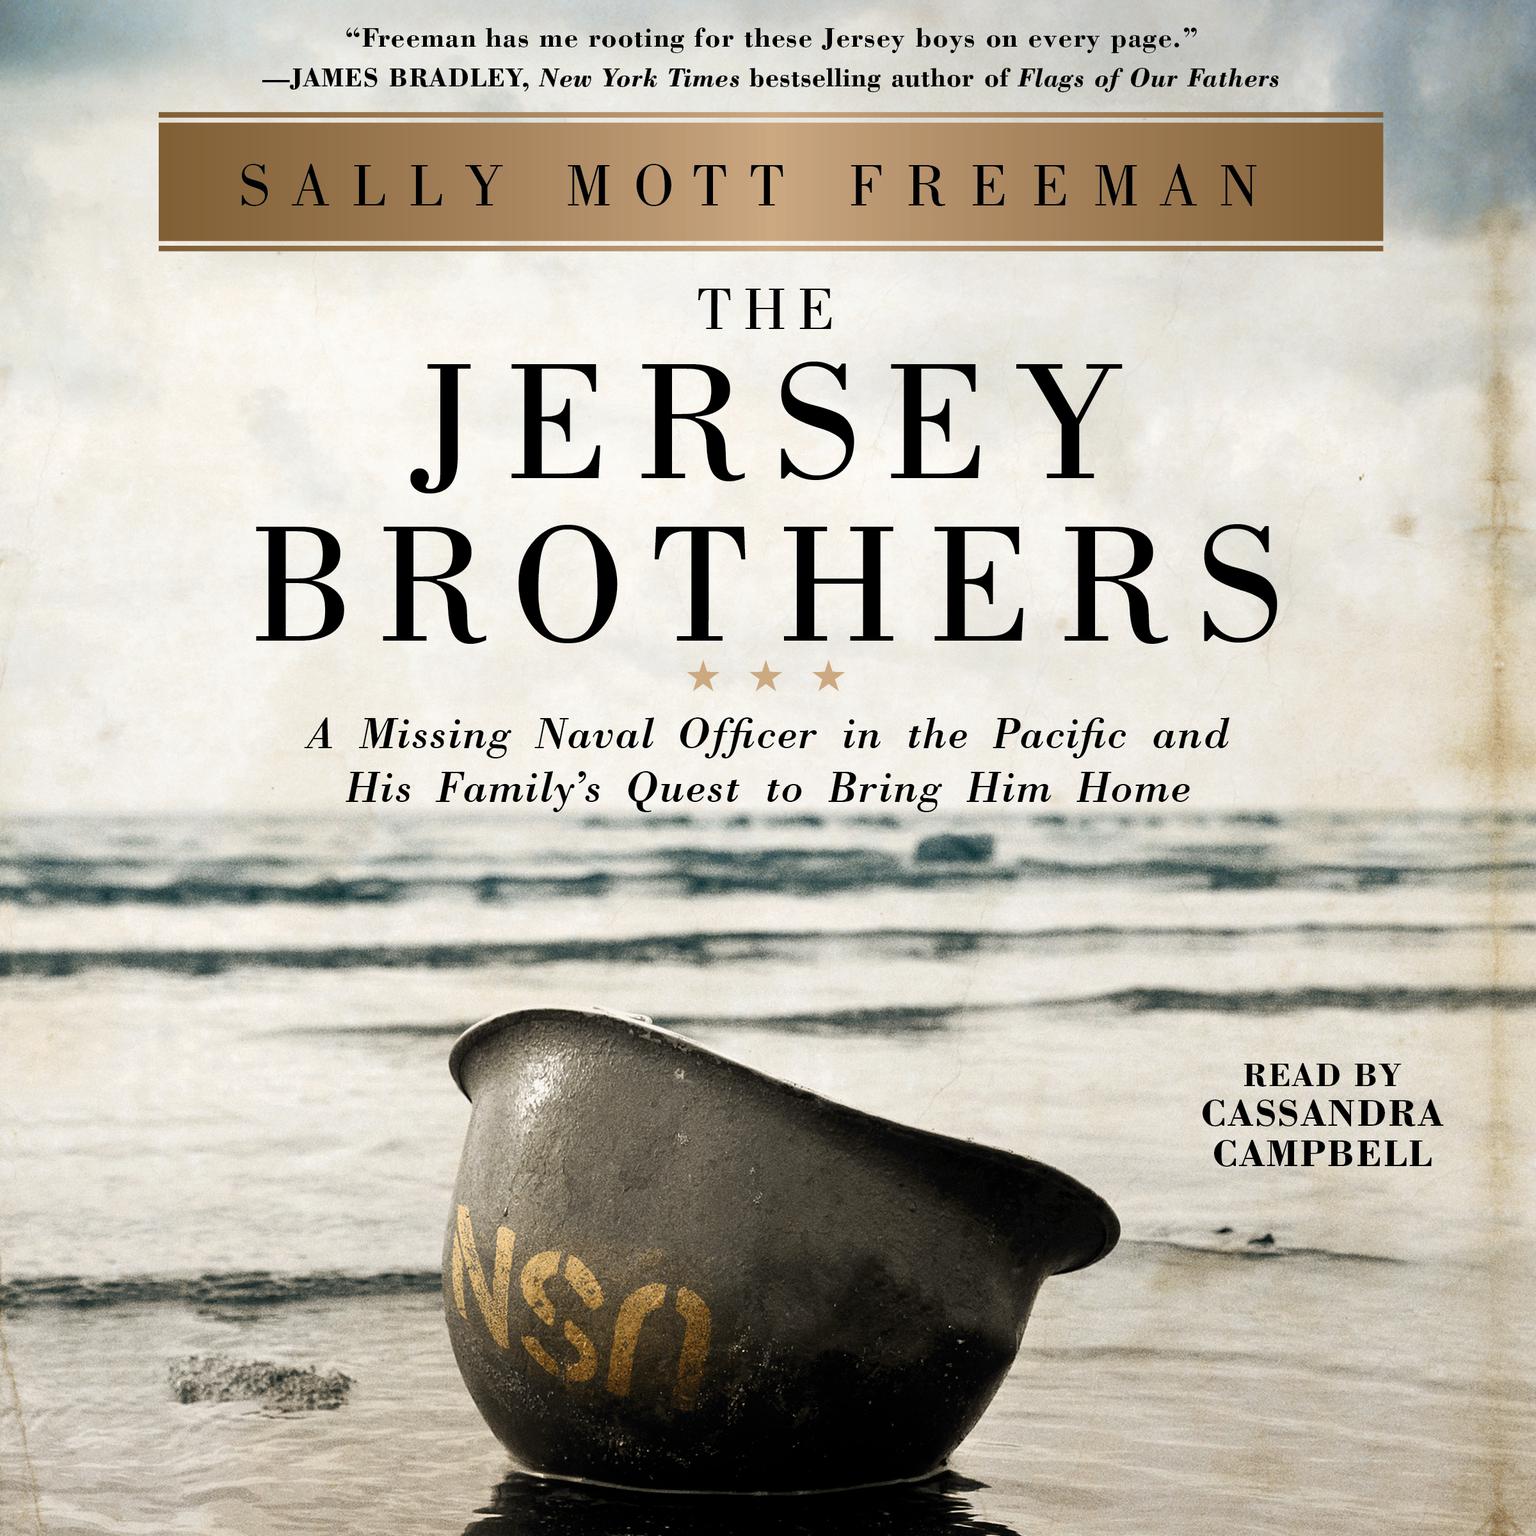 The Jersey Brothers: A Missing Naval Officer in the Pacific and His Familys Quest to Bring Him Home Audiobook, by Sally Mott Freeman